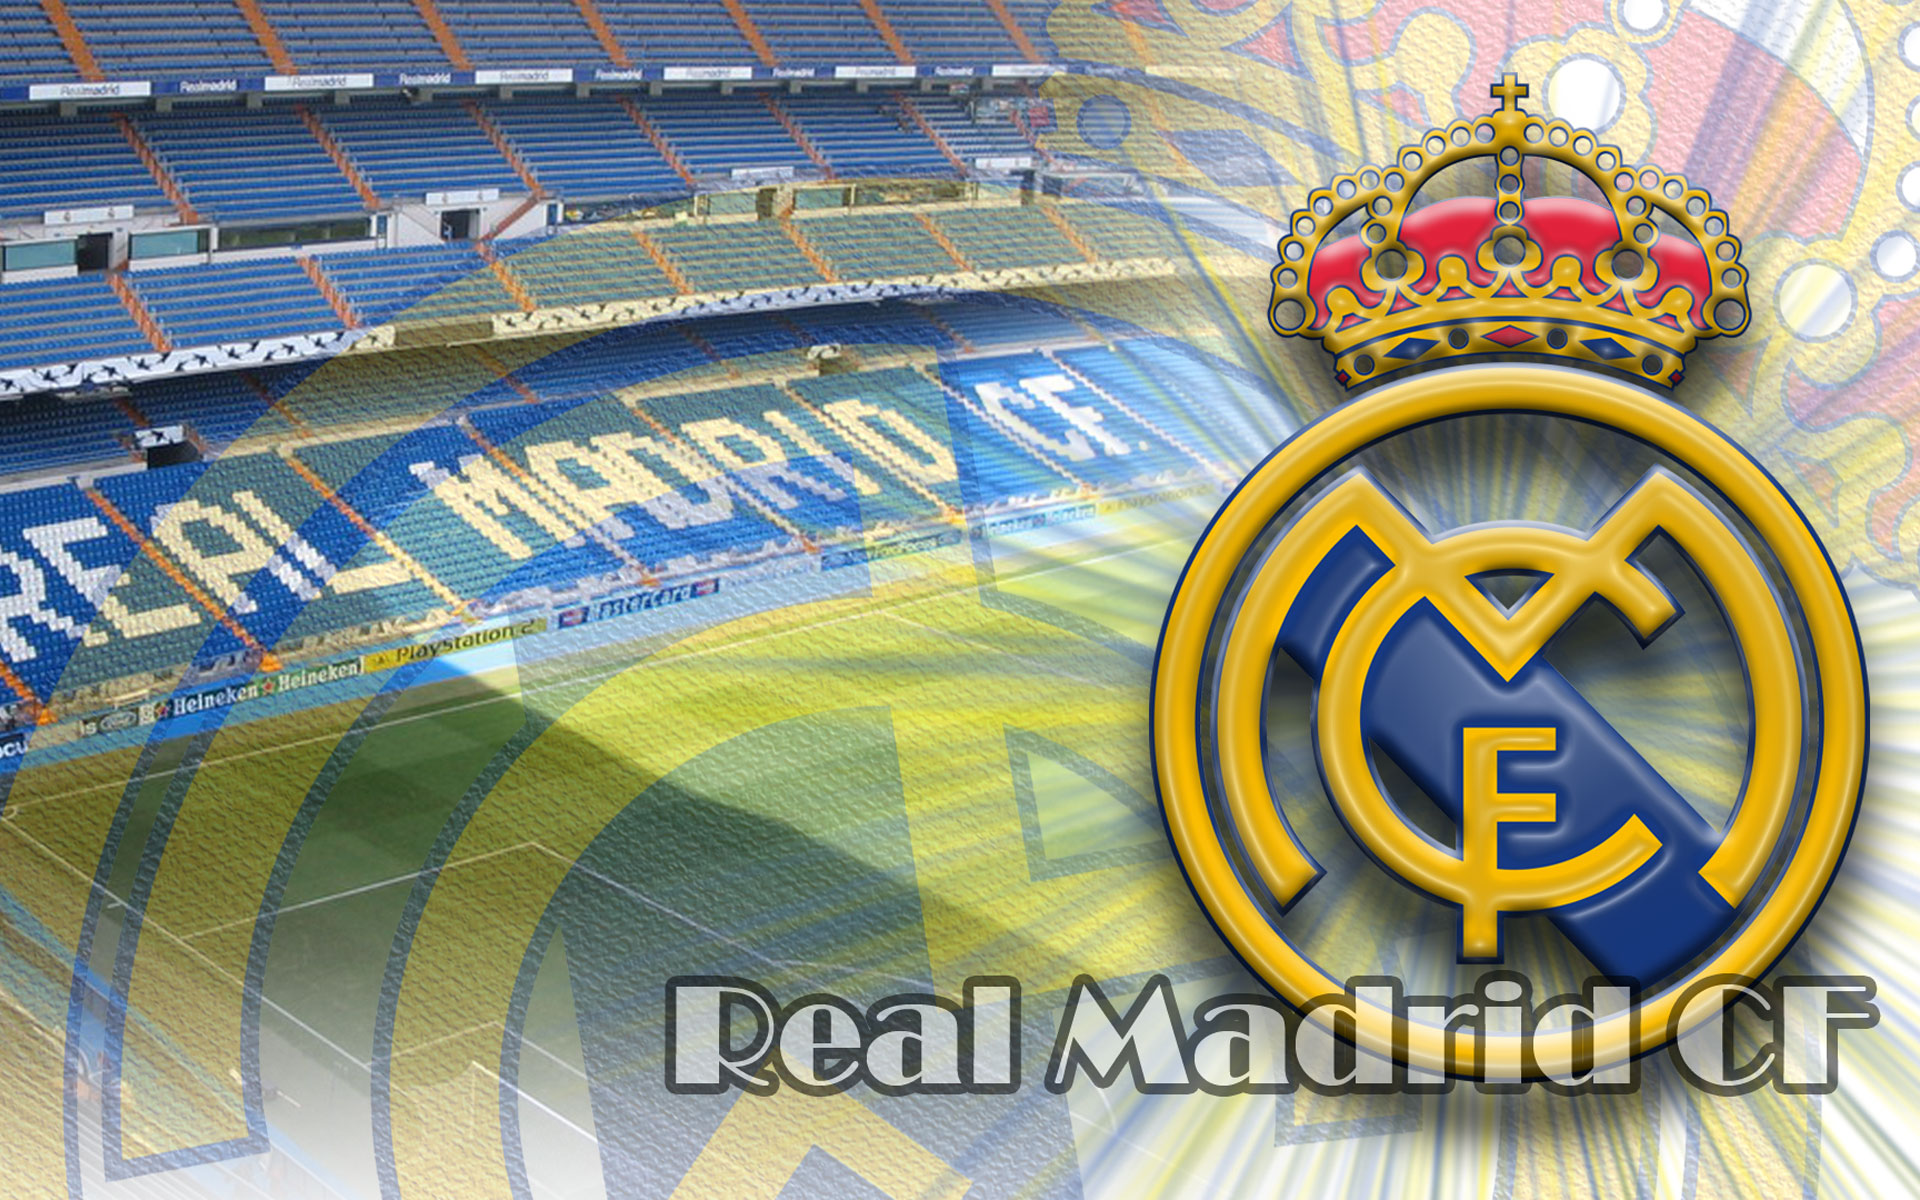 Cool Real Madrid Fc Logo Wallpaper Image With